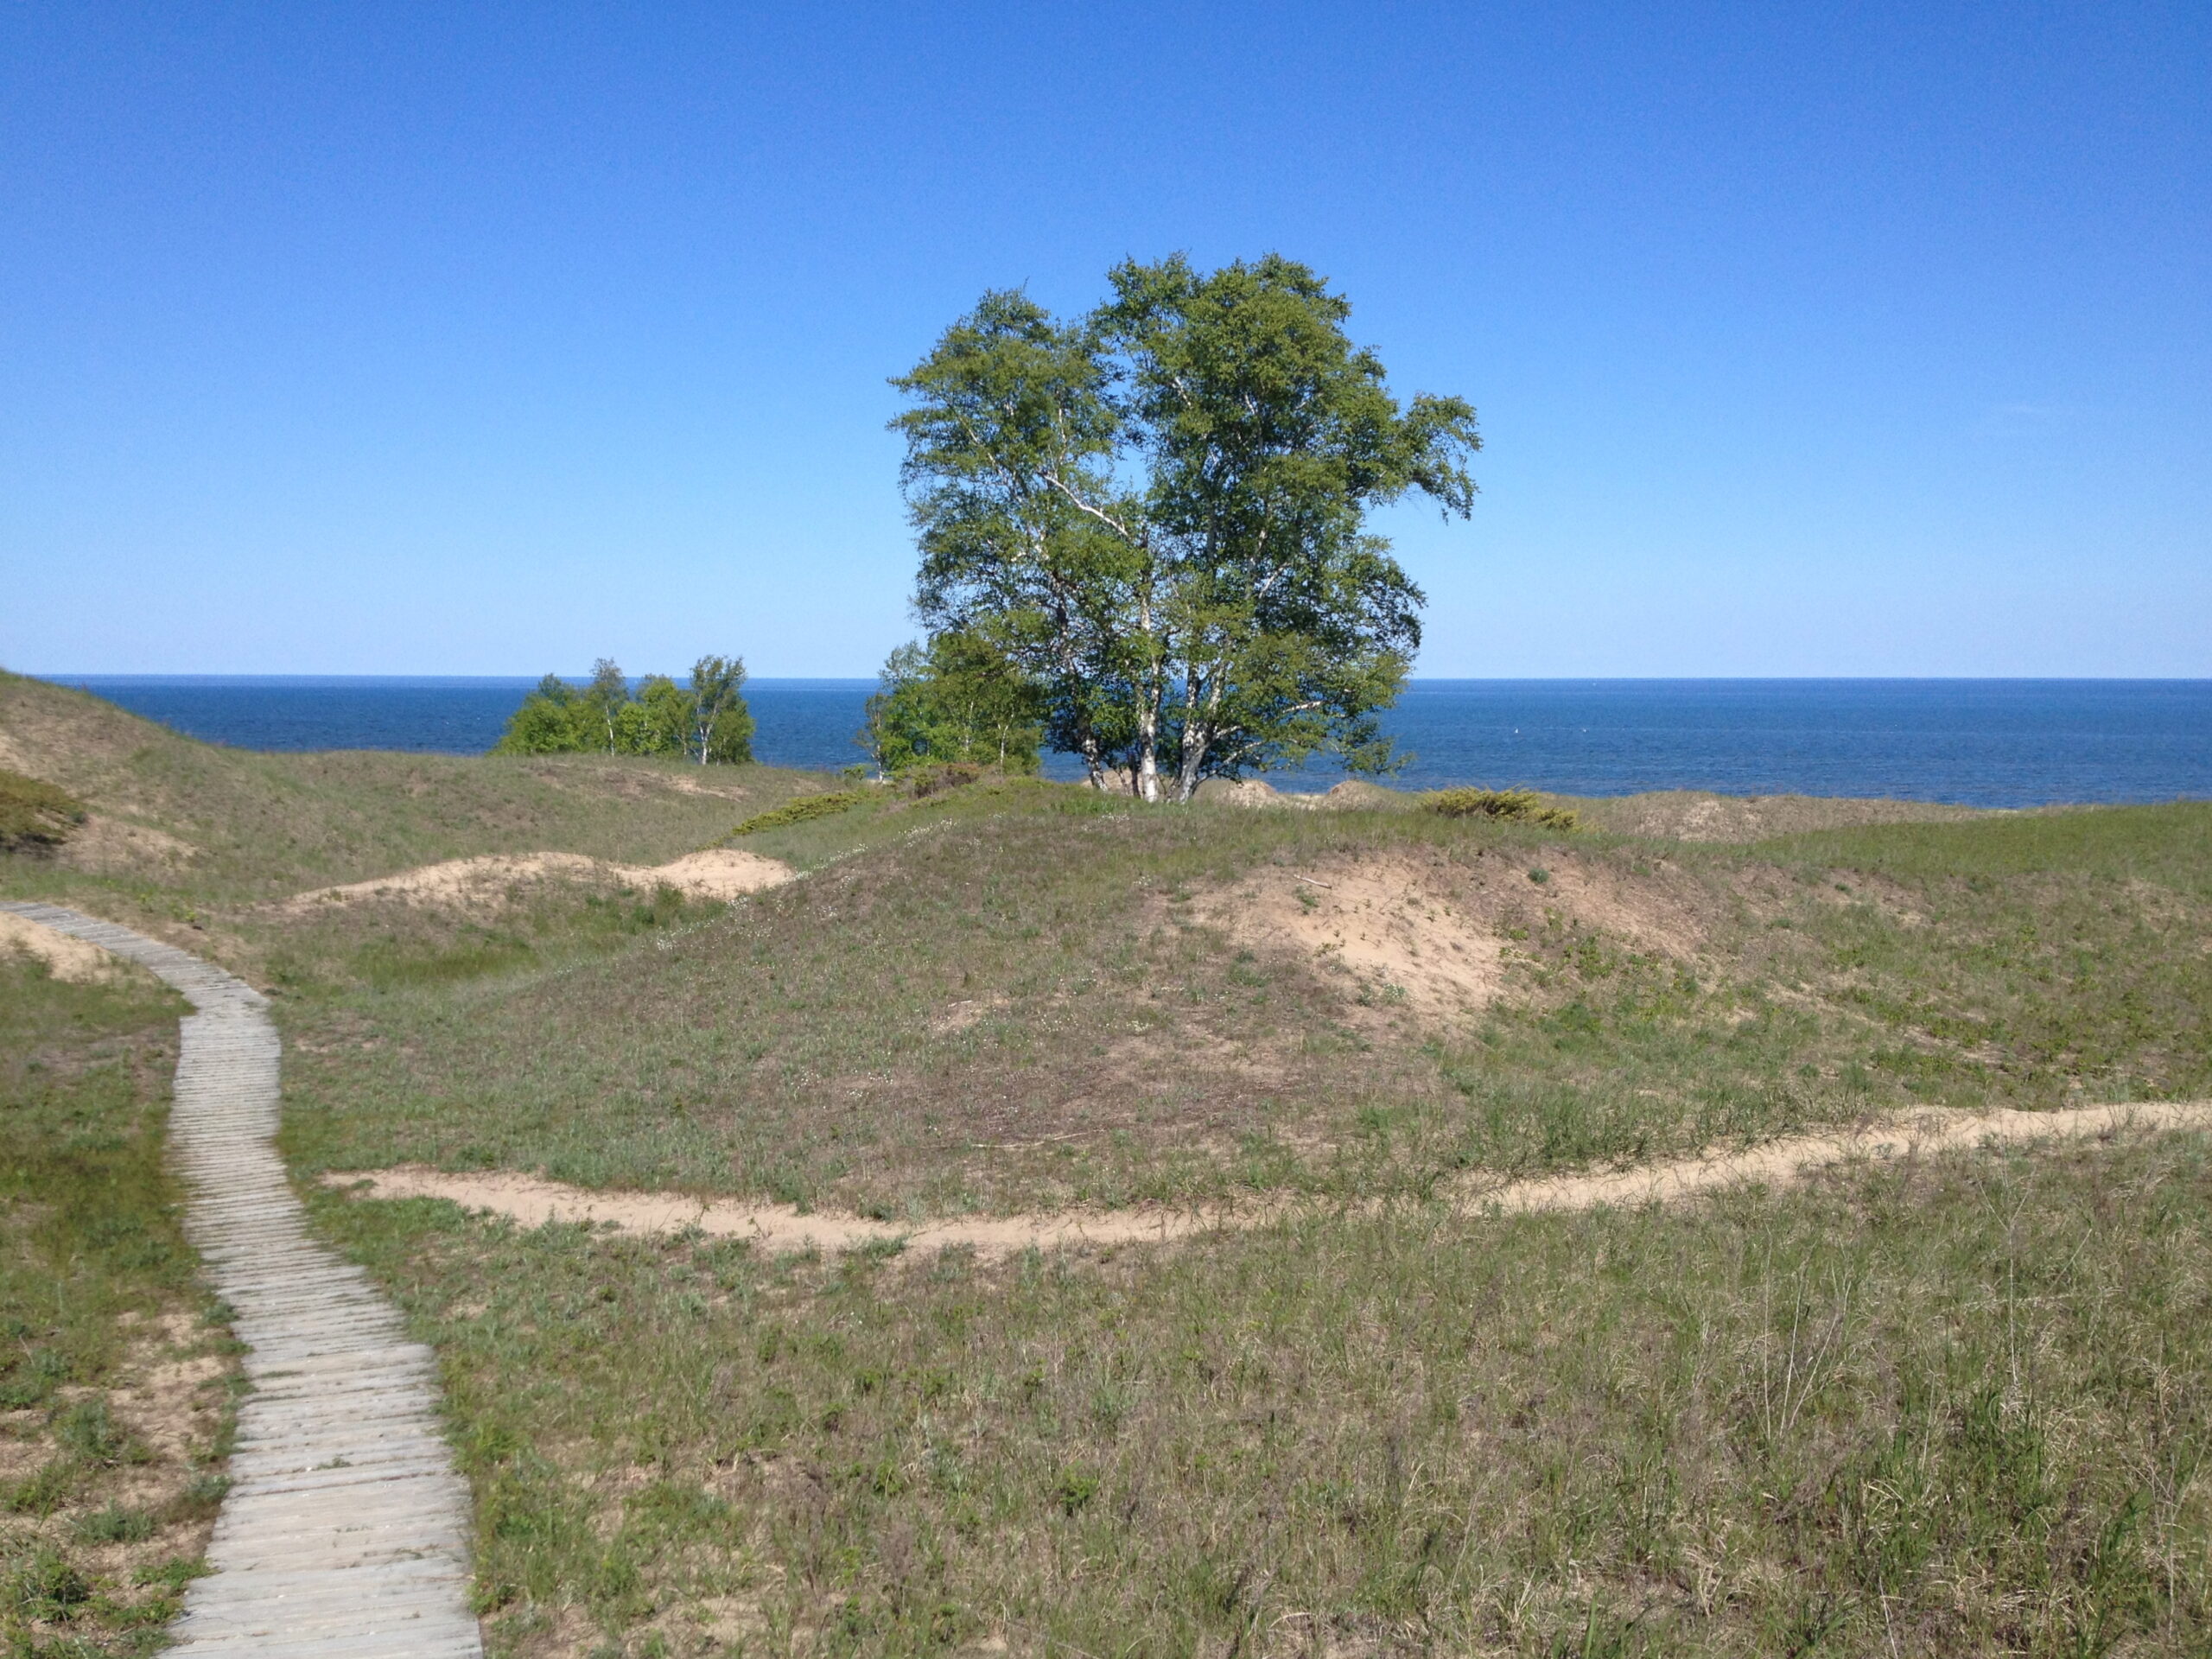 Groups urge Evers to block land exchange for proposed golf course along Lake Michigan